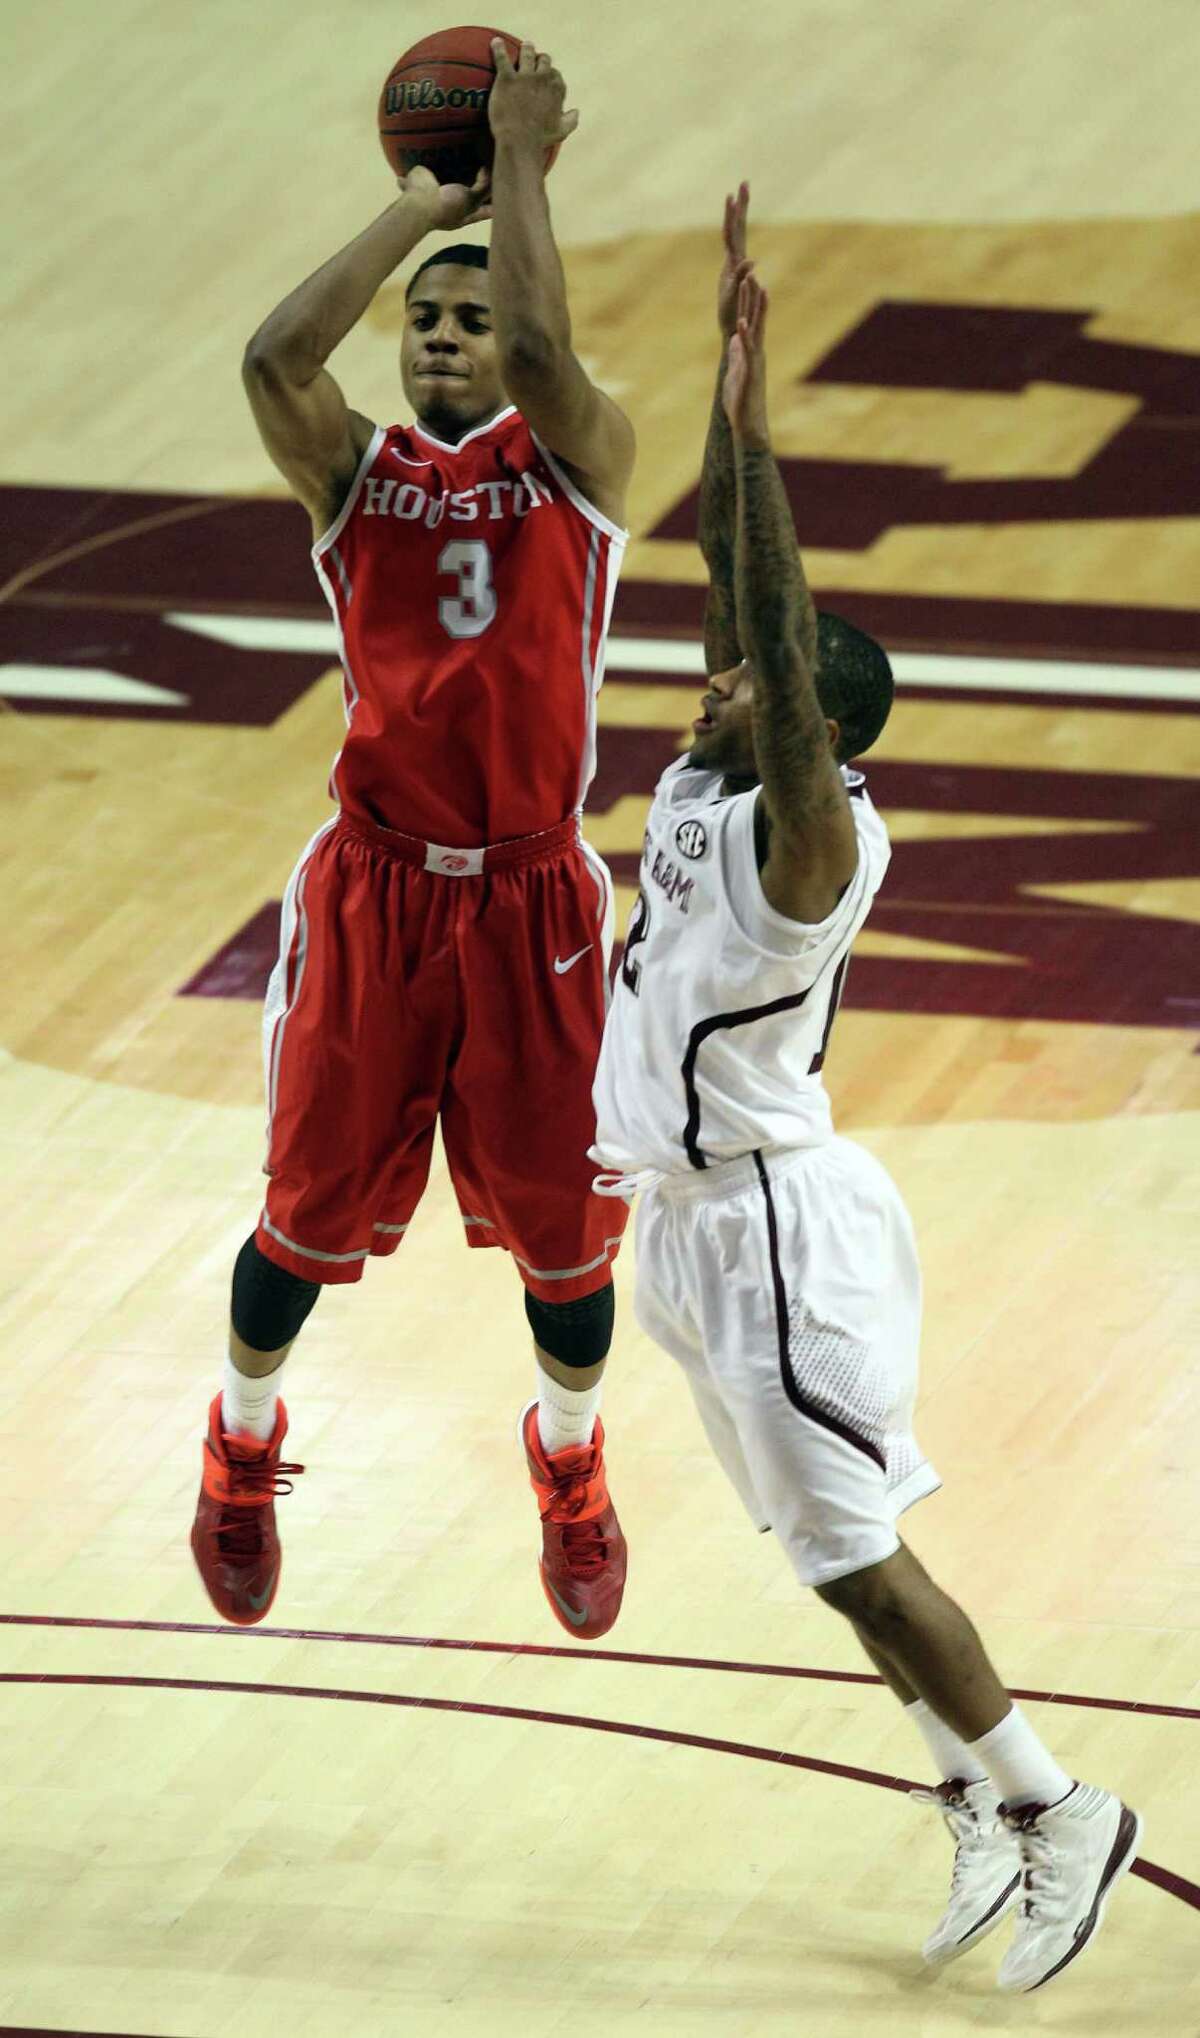 Houston's Jaaron Simmons (3) shoots the ball as Teaxs A&M's Fabyon Harris defends during the second half of an NCAA college basketball game, Wednesday, December 3, 2013, at Reed Arena in College Station, TX.